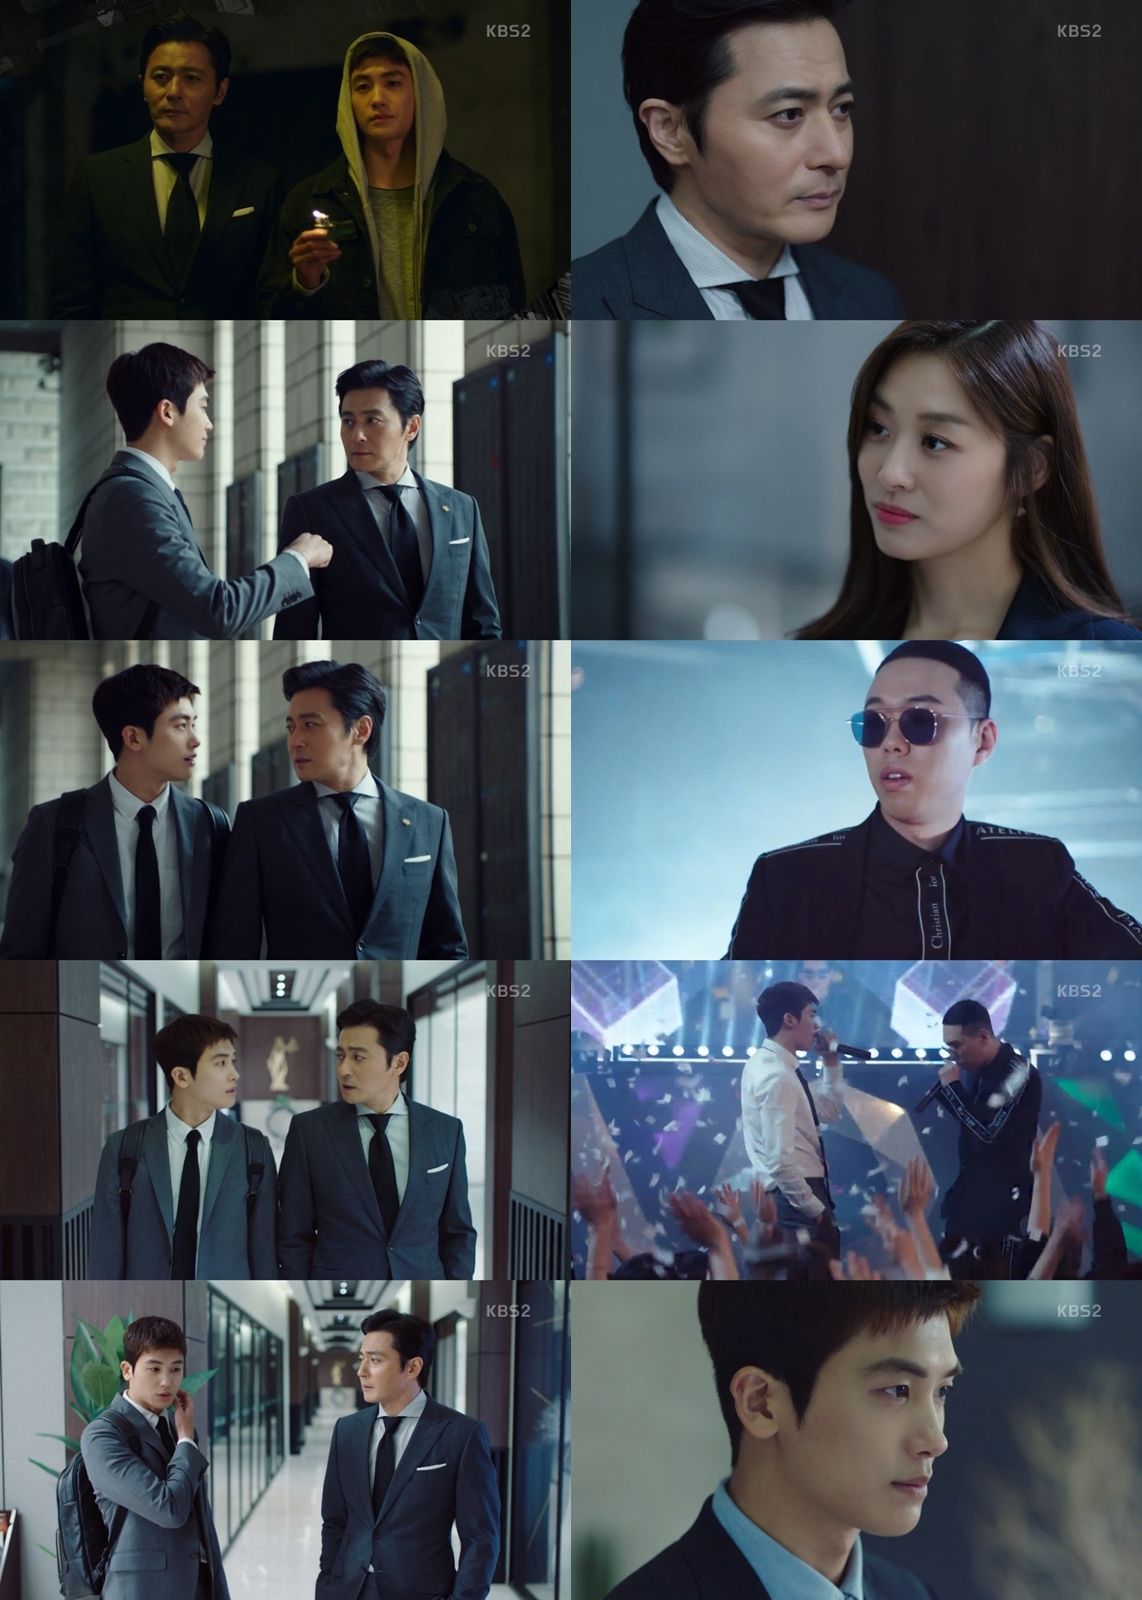 On KBS 2TV Suits broadcast on the 2nd, Park Hyung-sik (Ko Yeon-woo) started with the identity discovery Danger.Violents have come to law firms to regain Drug in the hands of Park Hyung-sik.Park Hyung-sik offered to negotiate with life as collateral, handing over Danger in difficulty; but the real Danger was separate.Jang Dong-gun (Choi Gang-seok) was angry that Park Hyung-sik did not handle Drug.Jang Dong-gun, Park Hyung-sik appeared to be wearing his feet on both sides.But for Park Hyung-sik, it was inevitable: not to have a foot, but to have yet to cut off a long-chained foot.Park Hyung-sik, who was again fired, decided to solve himself, and went to the gang with a drag. Jang Dong-gun appeared beside him.As a legendary lawyer who won only the winning game, Jang Dong-gun recited the legal explanations and grabbed the gang.Eventually, Drug burned on the spot, and Ko was able to untie one foot that could not be cut off thanks to Jang Dong-gun.In addition, Park Hyung-sik resolved the first case, the sexual harassment lawsuit, without going to trial.Park Hyung-sik is growing up beside Jang Dong-gun, while Jang Dong-gun, who is in charge of the chaebol divorce lawsuit, was shaken by his opponents lawyer Jang Shin-young (Na Joo-hee).They were lovers. She was also hinted that Jang Dong-gun had something to do with the past.At the same time, Park Hyung-sik met rapper BewhY at a club that was taken by Choi Gwi-hwa (Chae Geun-sik).Park Hyung-sik, who told BewhY while drunk that he was a fake lawyer.The next day, BewhY, who visited the law firm, put Park Hyung-sik back in the identity-discovery Danger.Three episodes of Suits were concluded, leaving a chewy question about how Park Hyung-sik would escape this Danger, the divorce trial of Jang Dong-gun, who was involved with his old lover, and whether his past would be revealed.The third episode of Suits captivated viewers by flexibly crossing various emotions such as tension, pleasantness, excitement and chewiness.This is a solid yet boring story, a tight development, the charm of three-dimensional characters, and their special chemistry.Here, Jang Dong-gun, Park Hyung-siks show of brochemy added dramatic fun.It was a different kind of fun to show up when you were in trouble, to help you, to turn your mind into a sparkling situation in a tight situation.